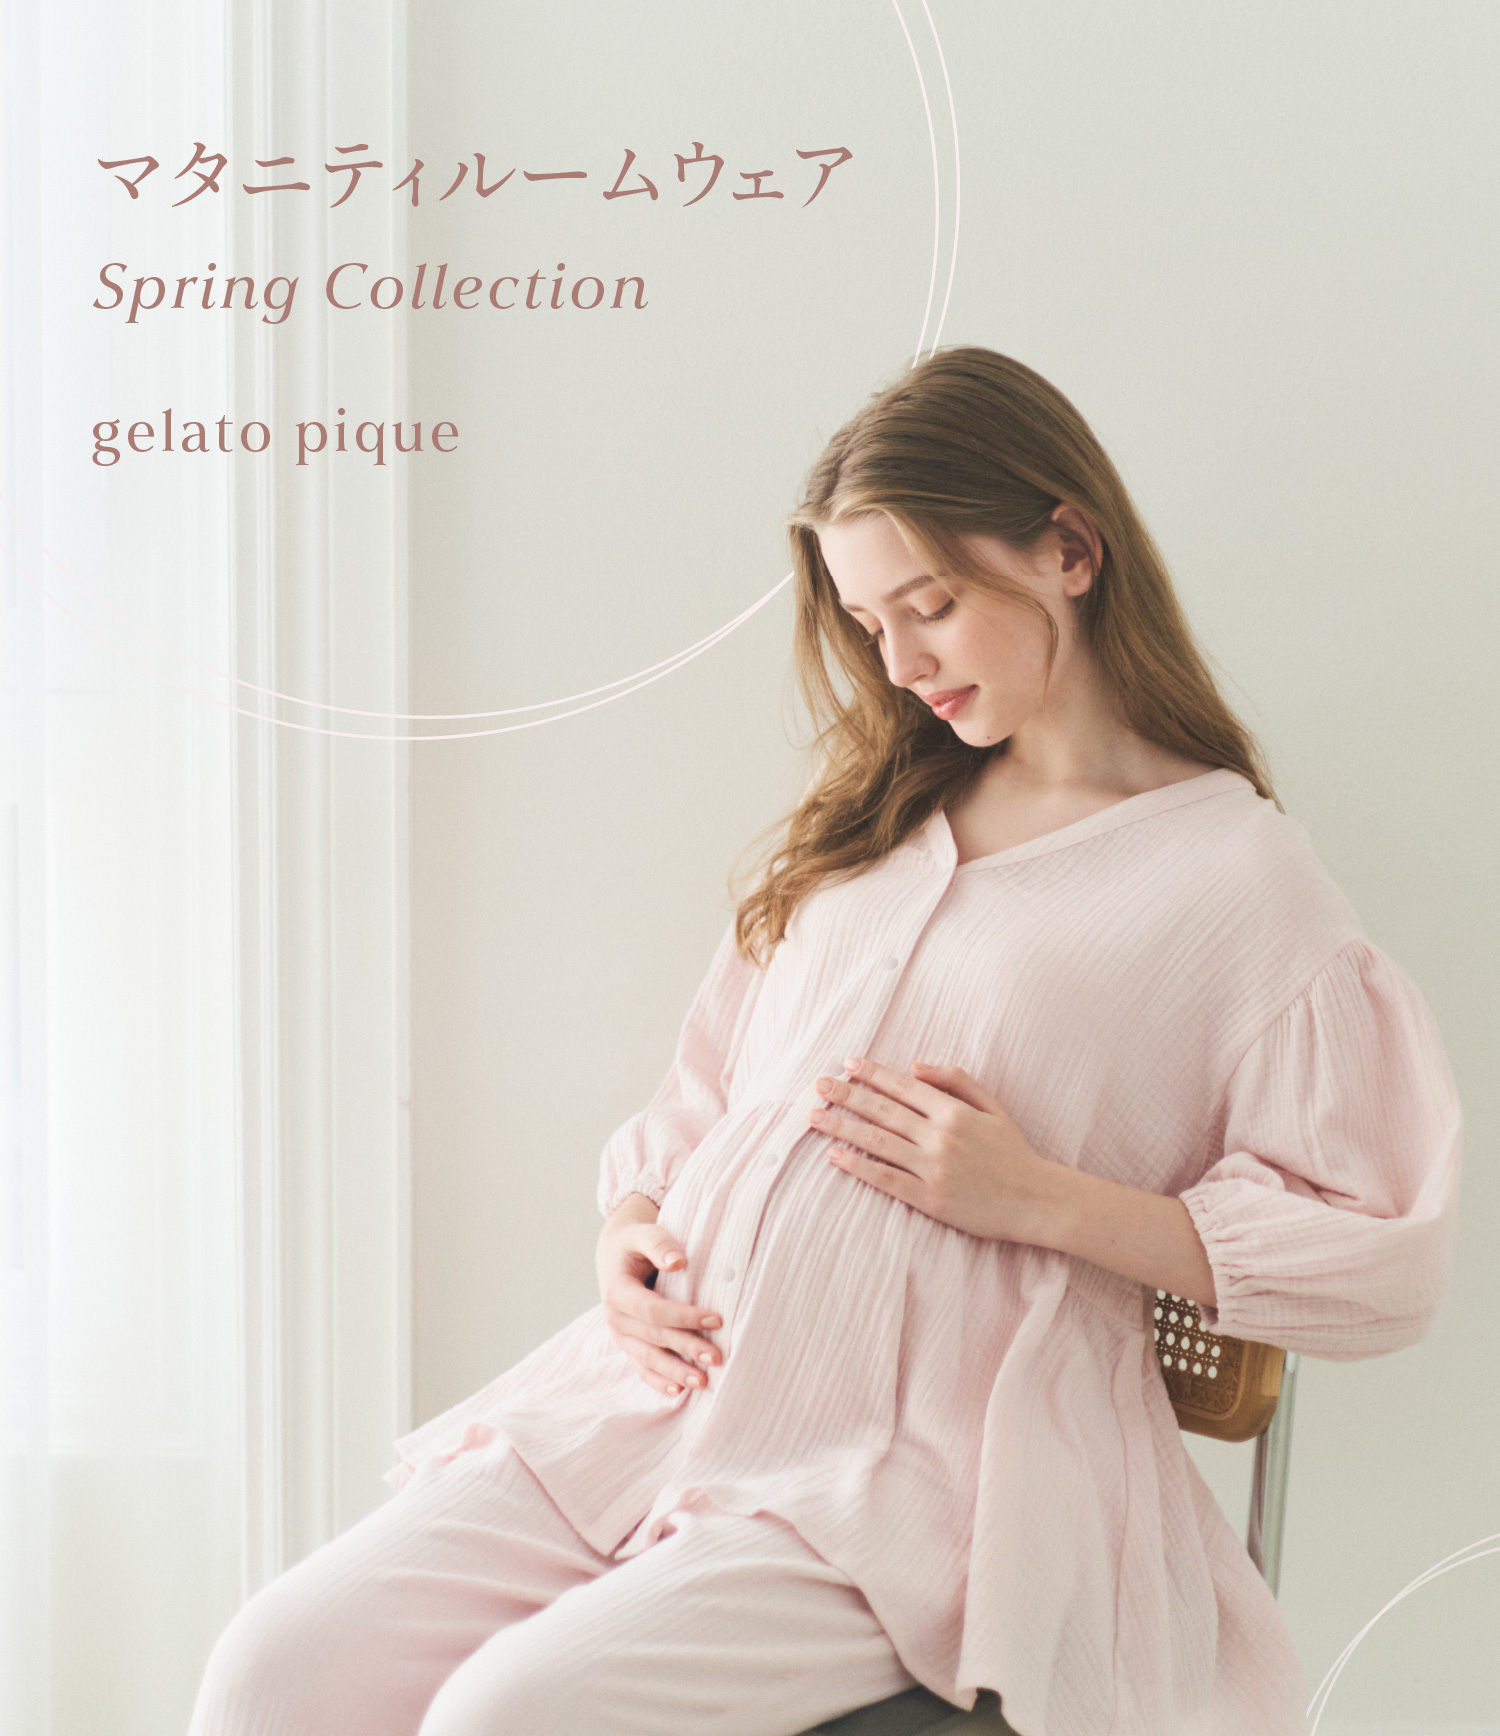 GELATO PIQUE マタニティルームウェア & グッズ Spring Collection